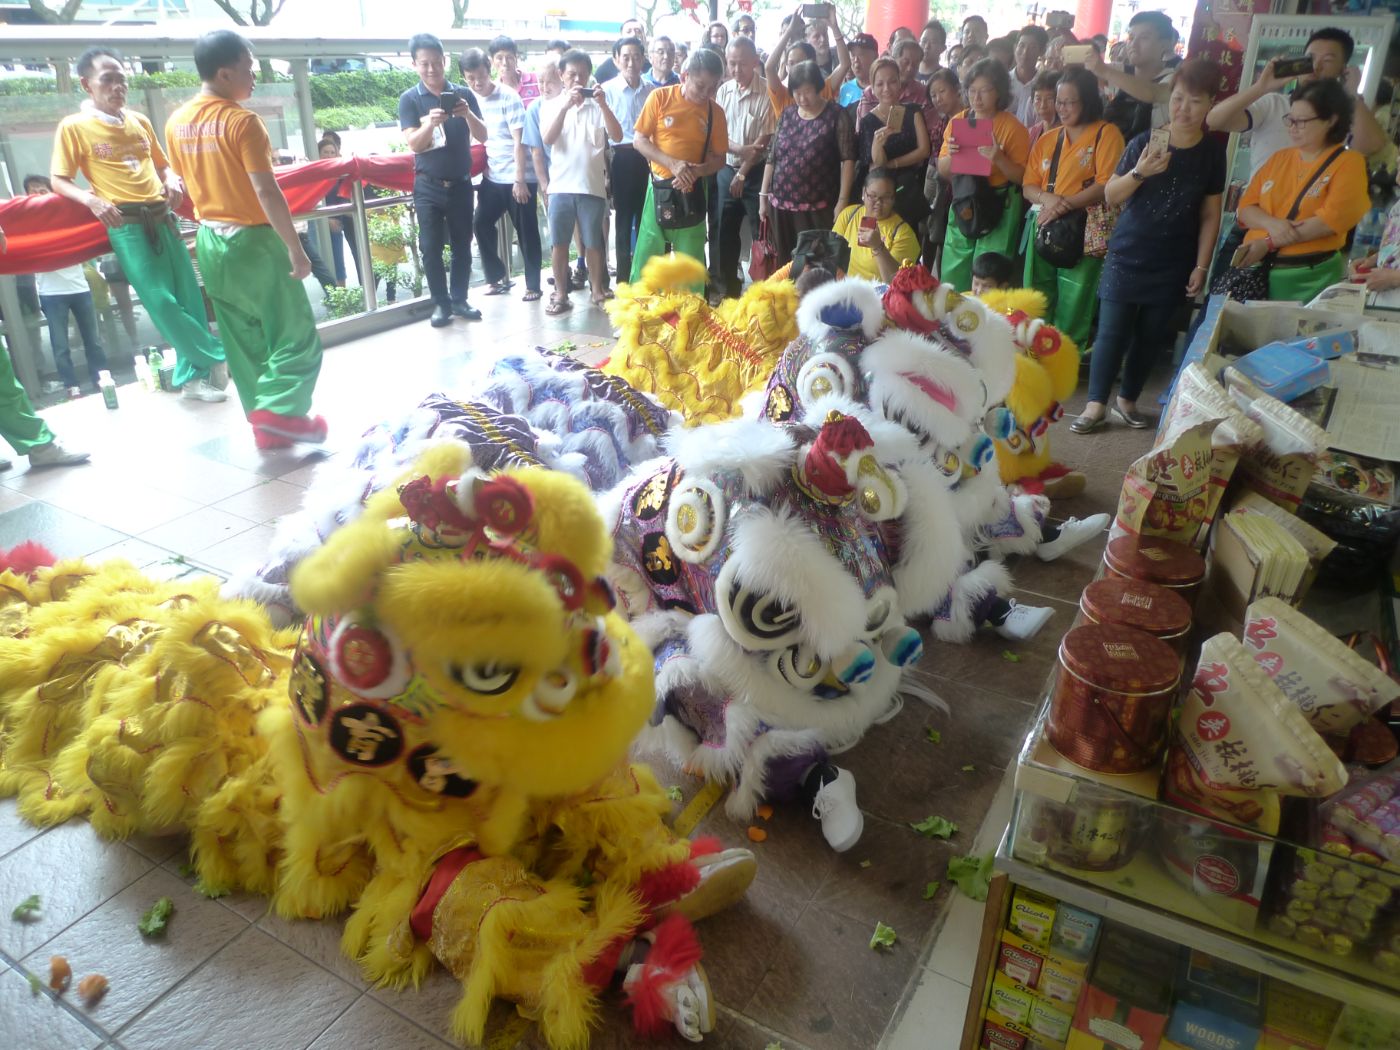 A lion dance troupe at a shopfront, to bring auspicious luck and good fortune